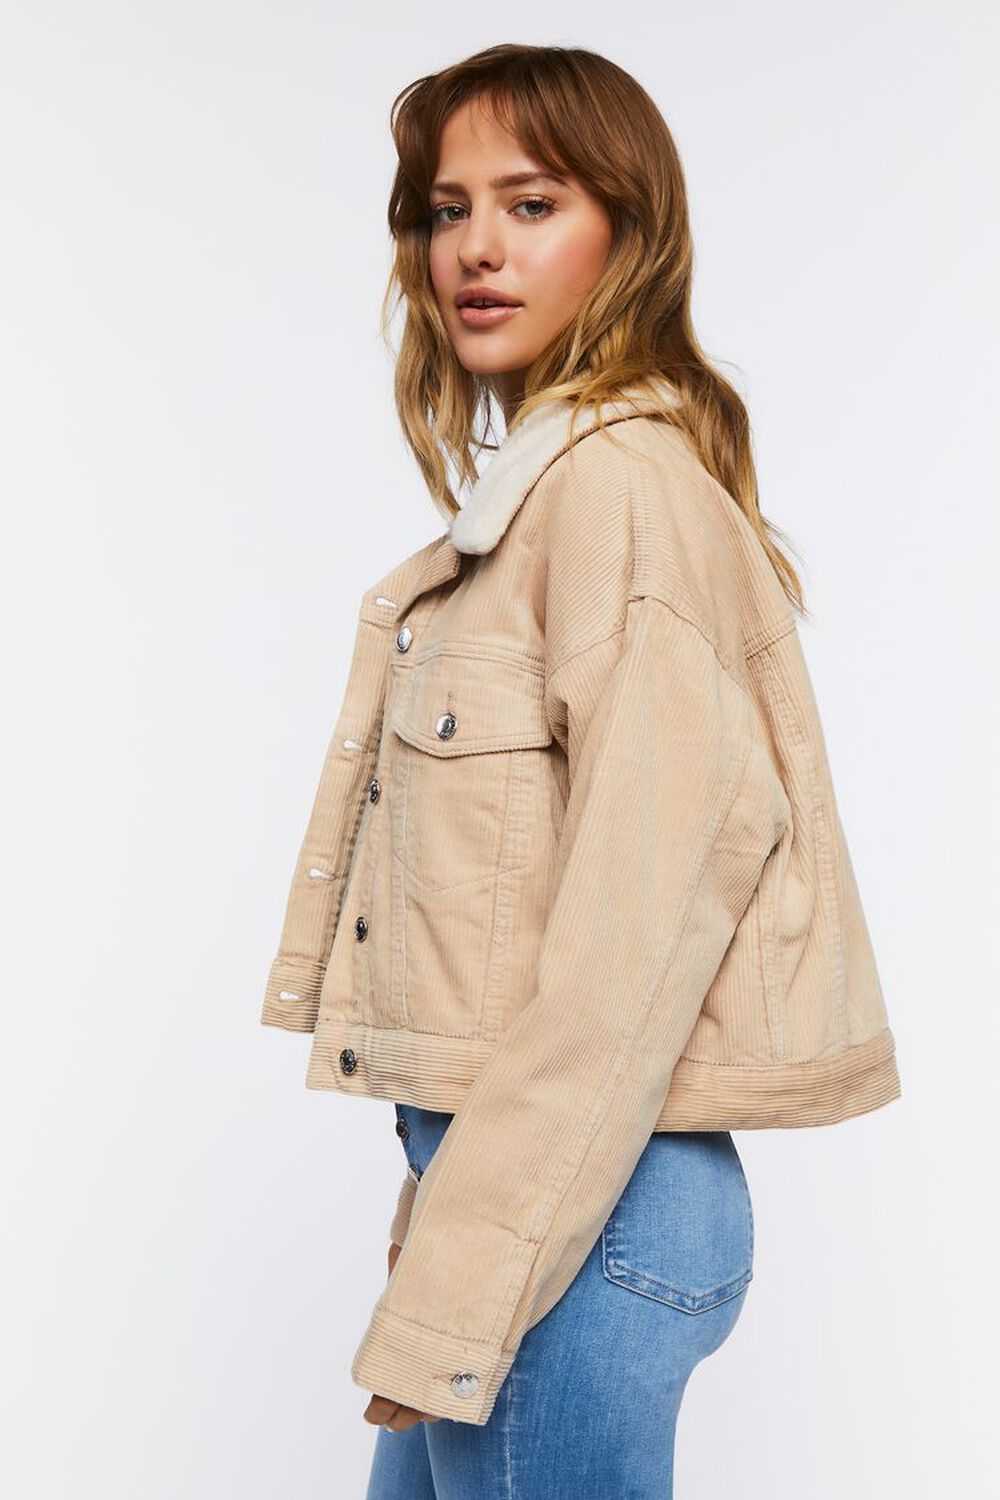 Cotton Faux Shearling Jacket | Forever 21 | Forever 21 (US)